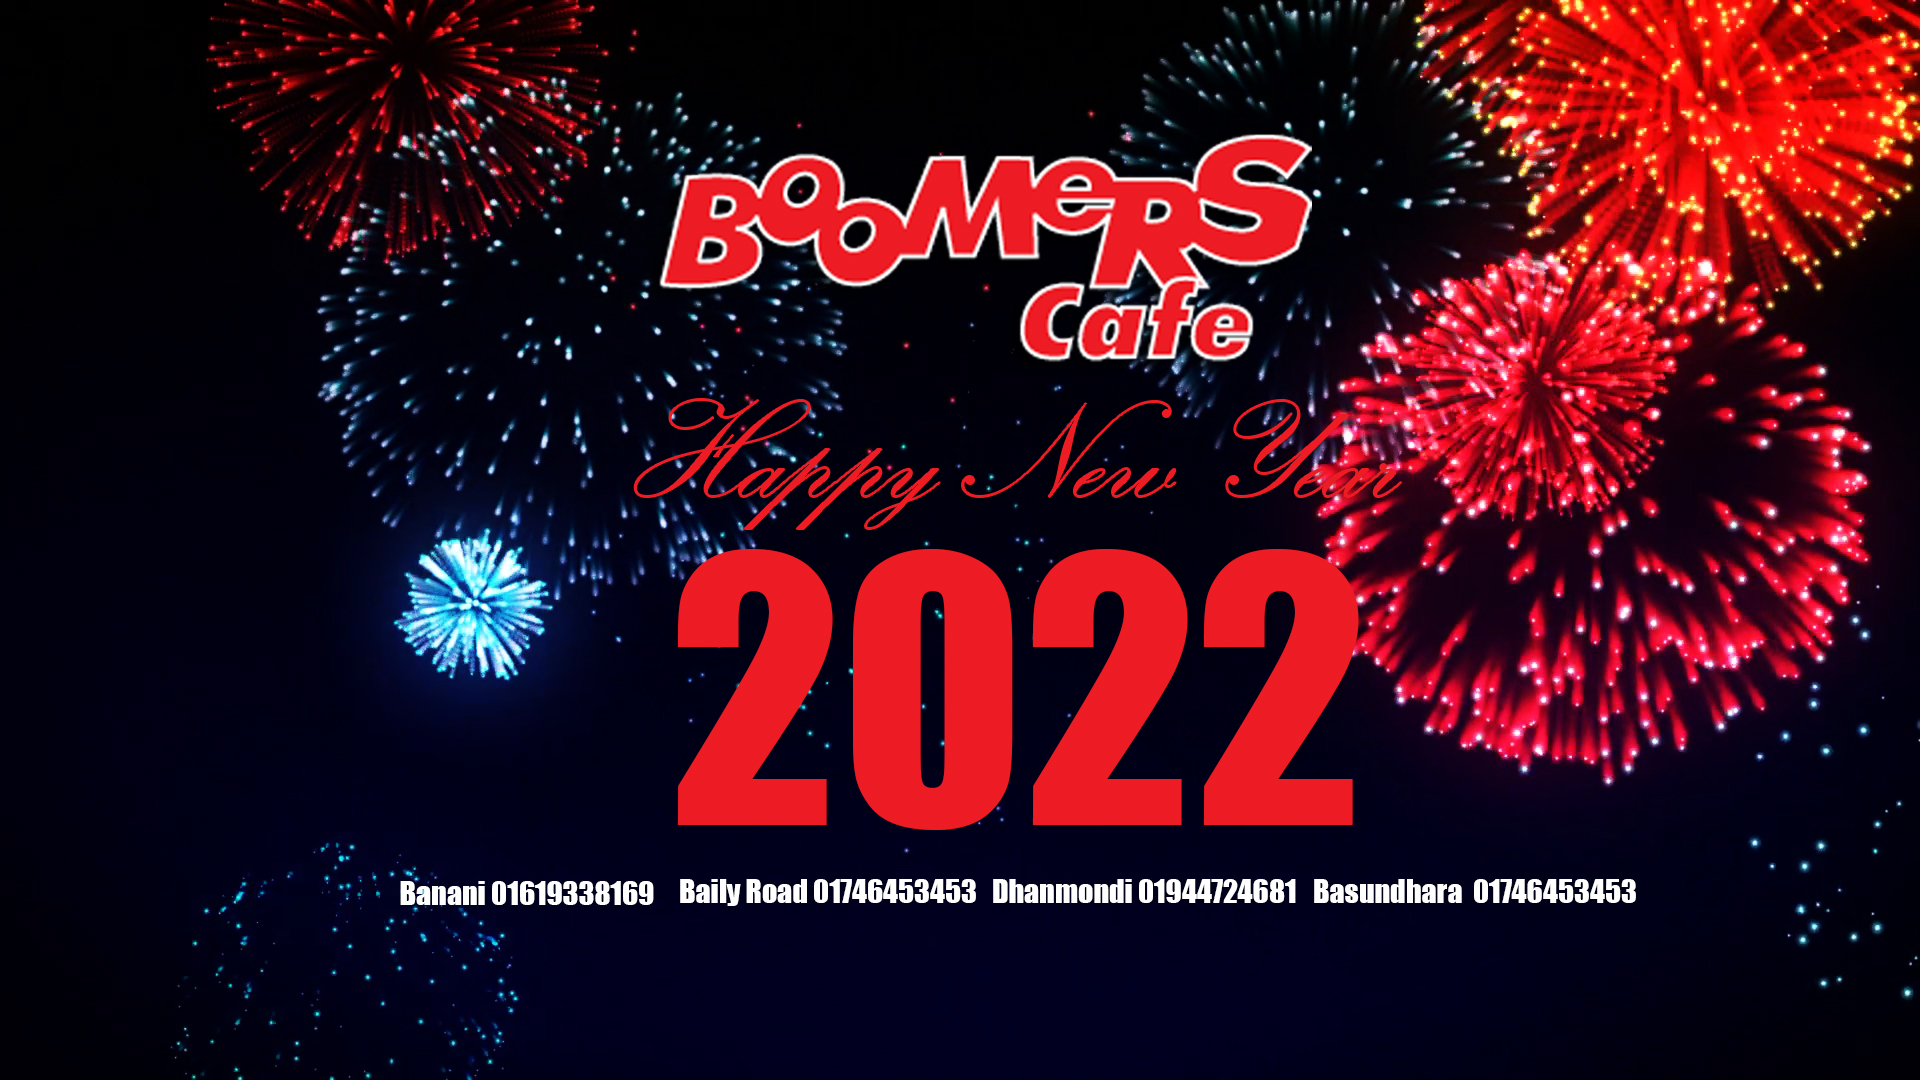 Boomers Cafe Restaurant Dhanmondi Menu Price, Delivery, Location and Contact Number